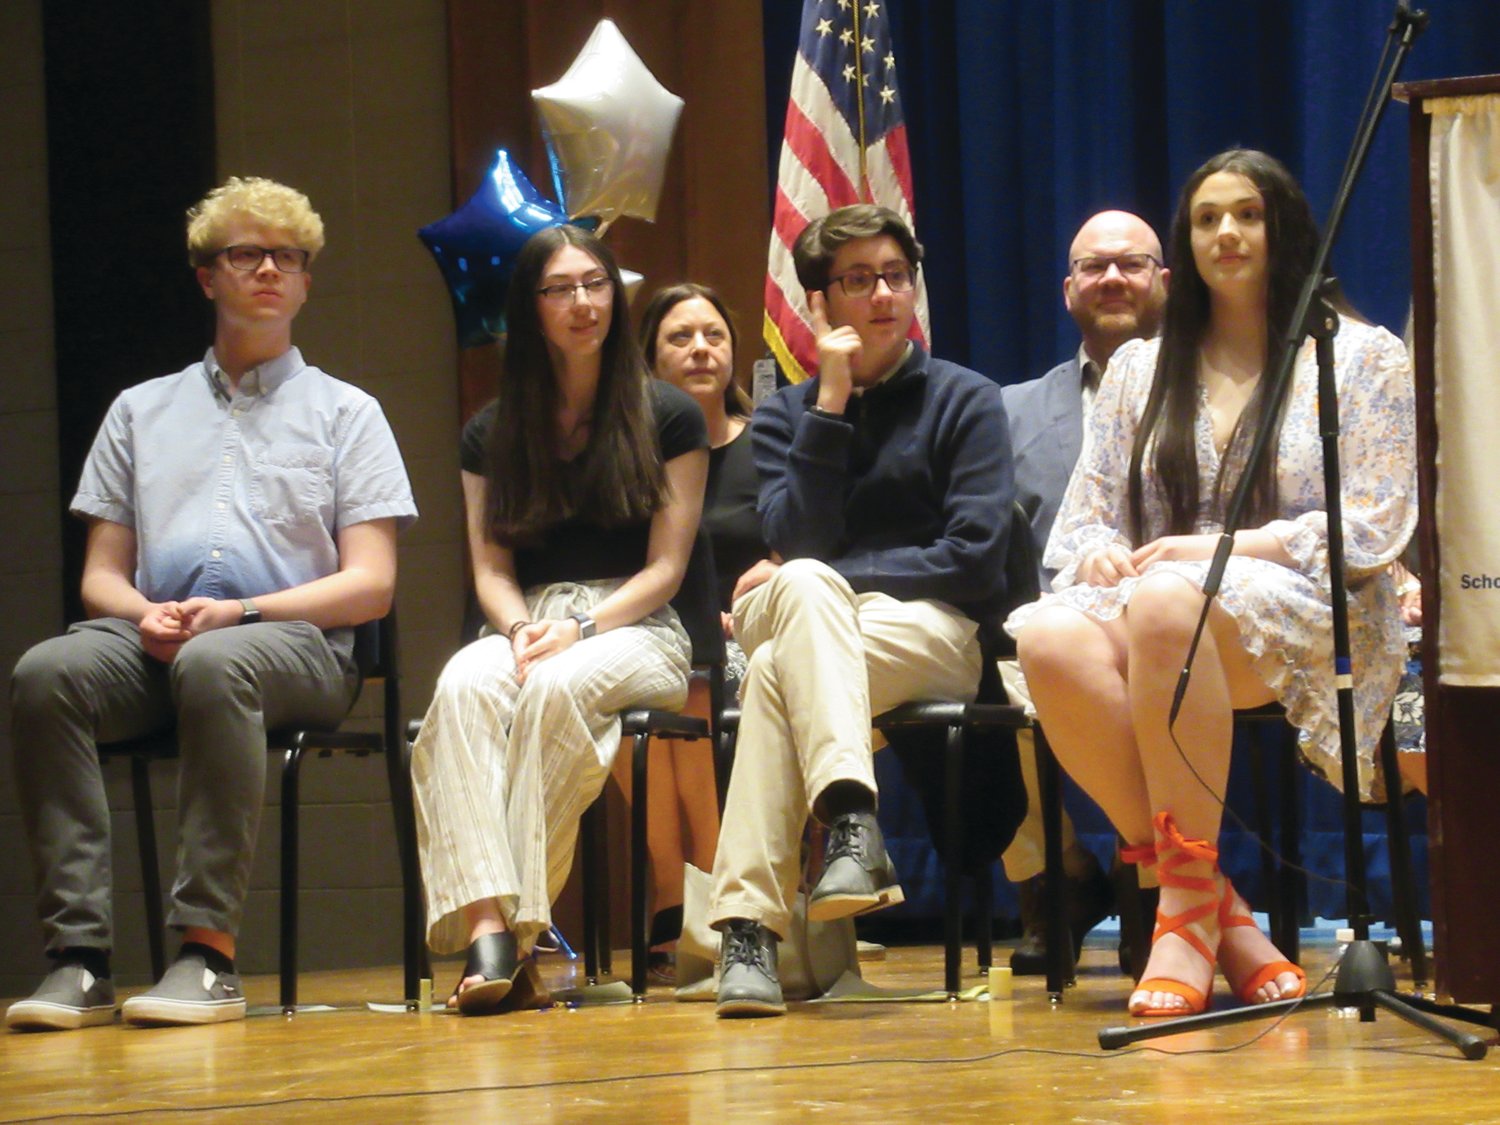 LINKED LEADERS: The 2023 officers of the Johnston High Chapter of the National Honor Society will be under the direction of Parliamentarian Jackson Troxell, Historian Allison Benoit, Vice President Charles Curci and President Allison Benoit who took their oaths during last week’s impressive induction ceremony.